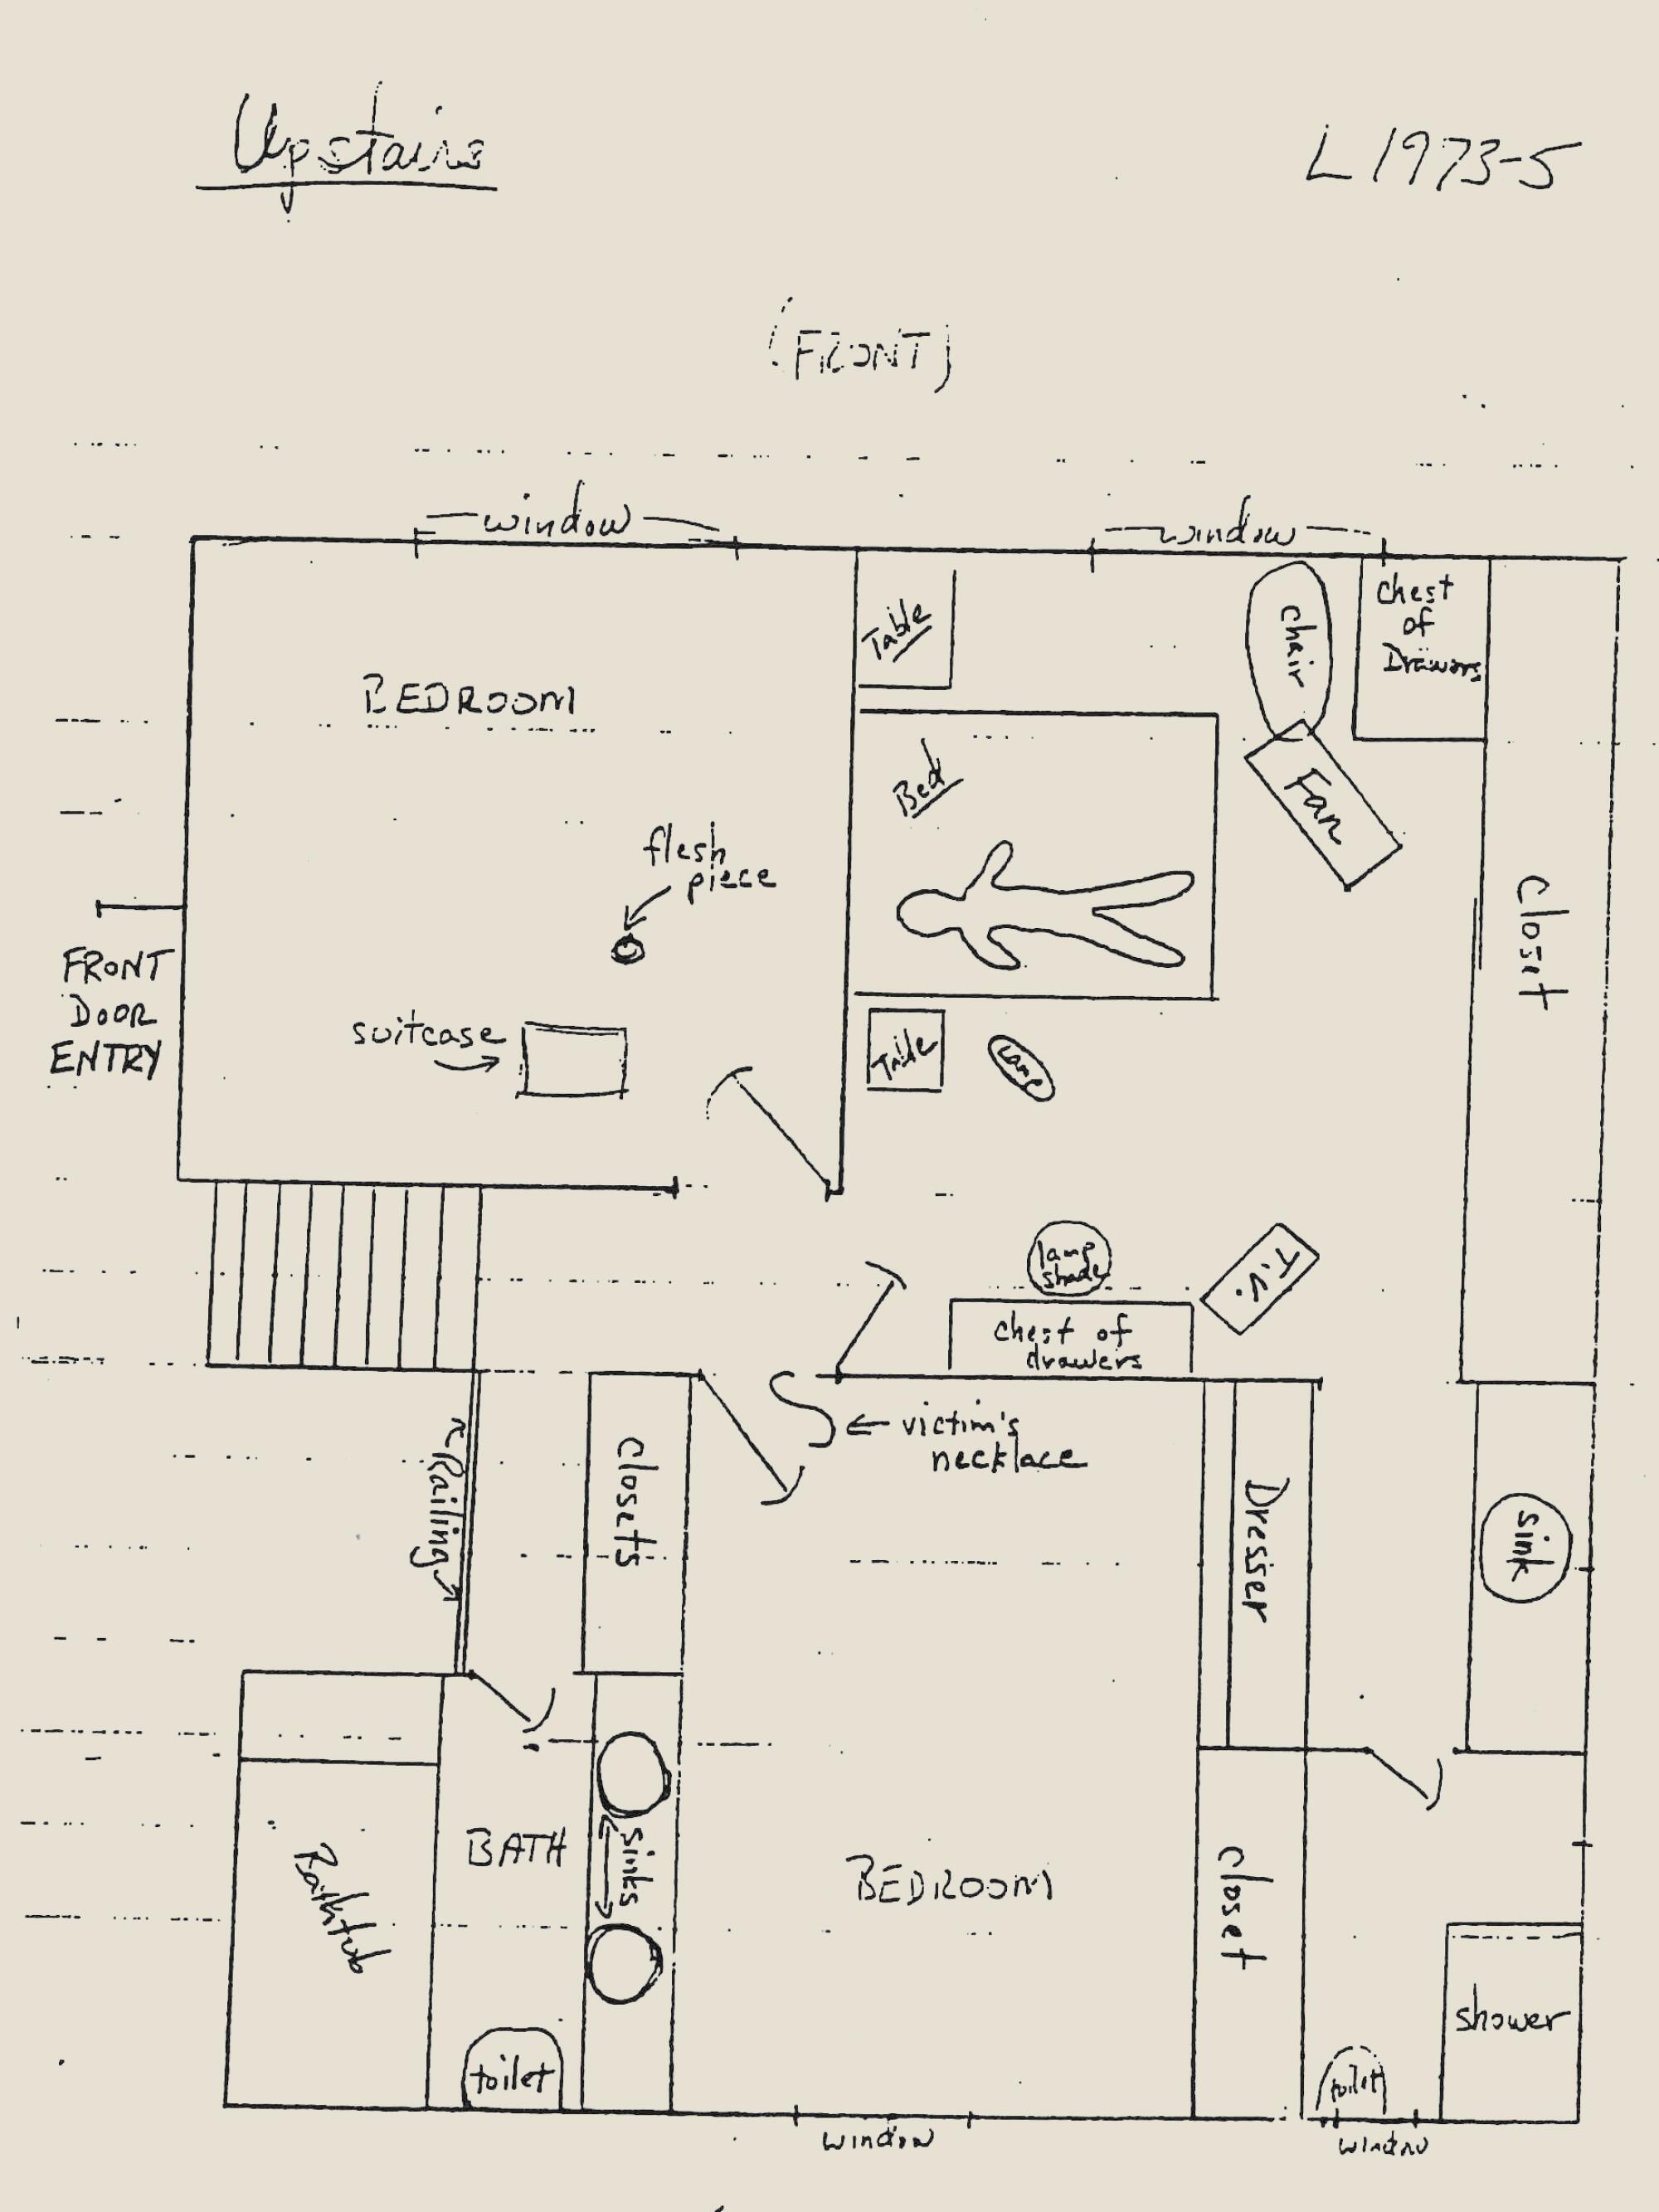 Hand-drawn sketch of a floorplan showing rooms of a house where a murder occurred.